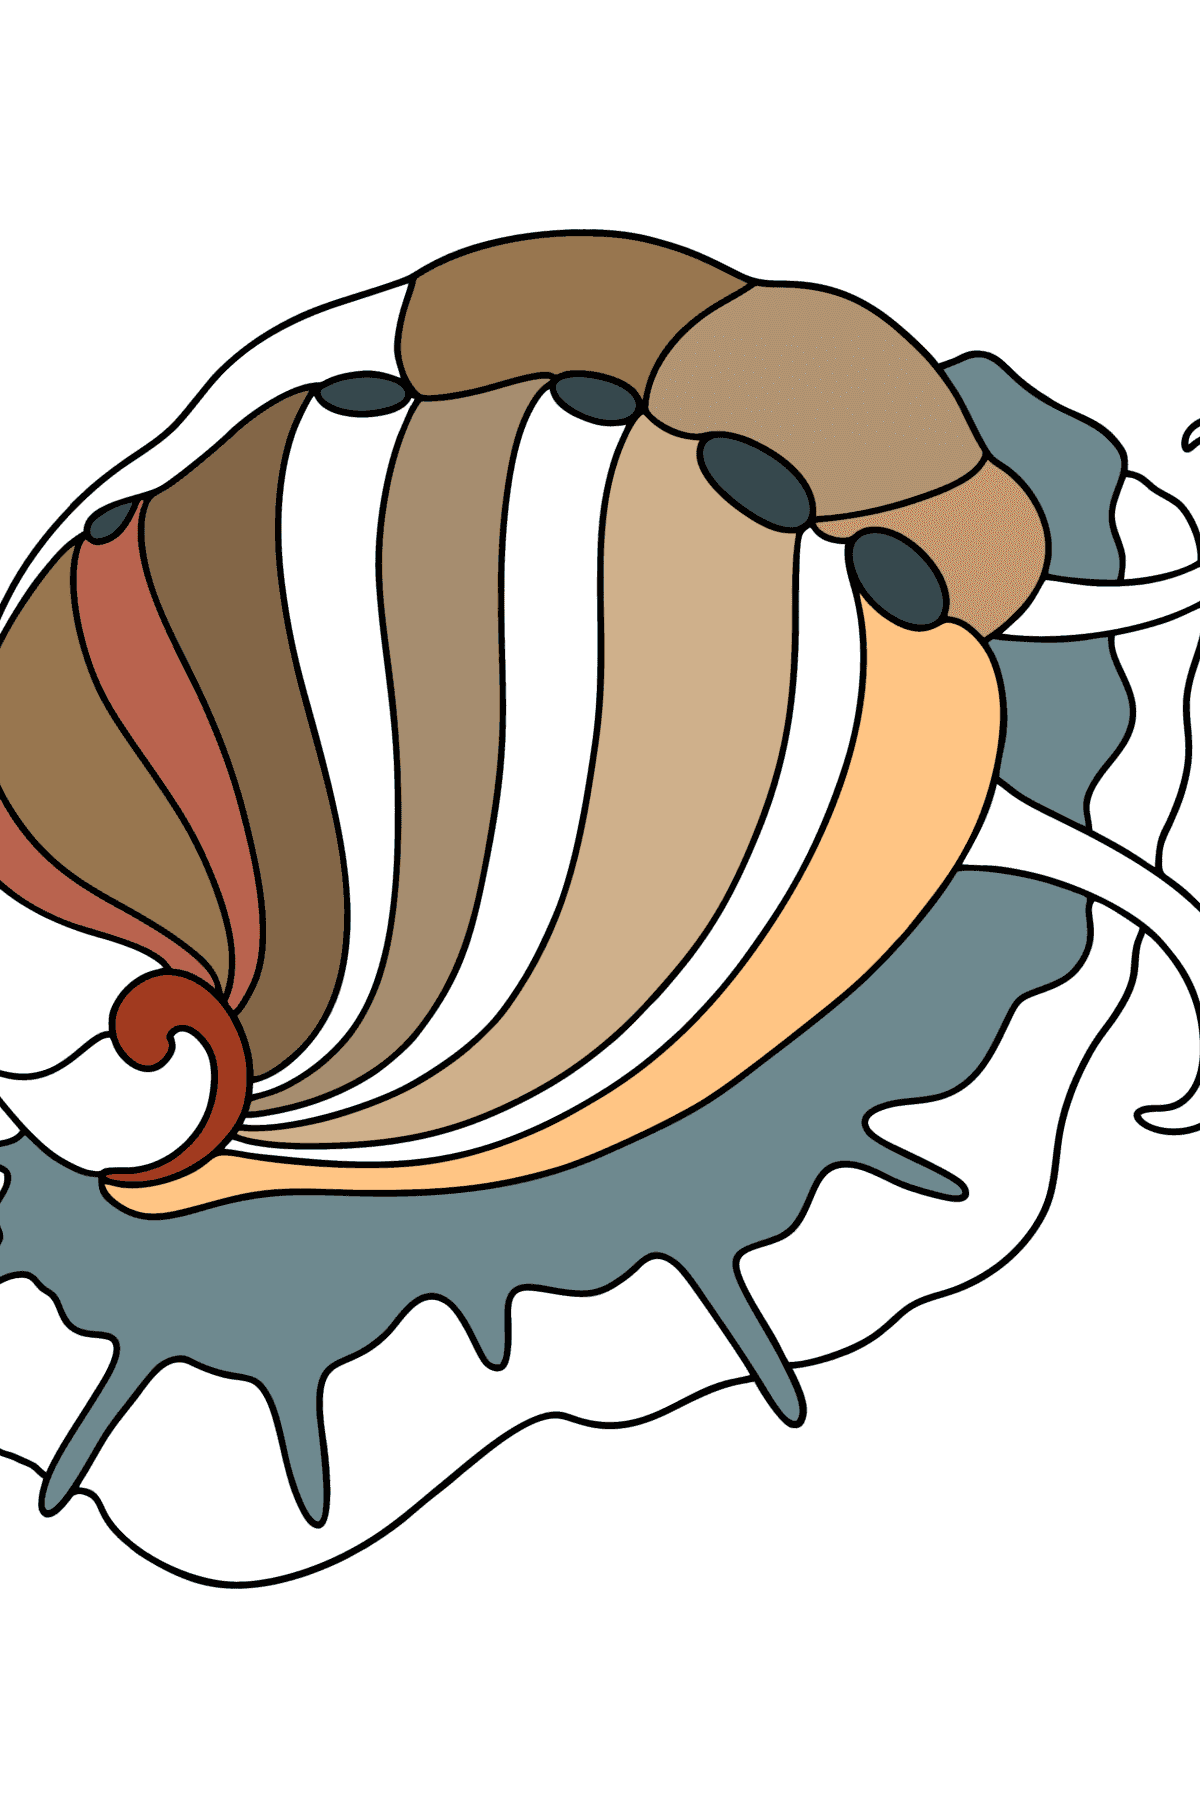 Mollusk abalone coloring page - Coloring Pages for Kids